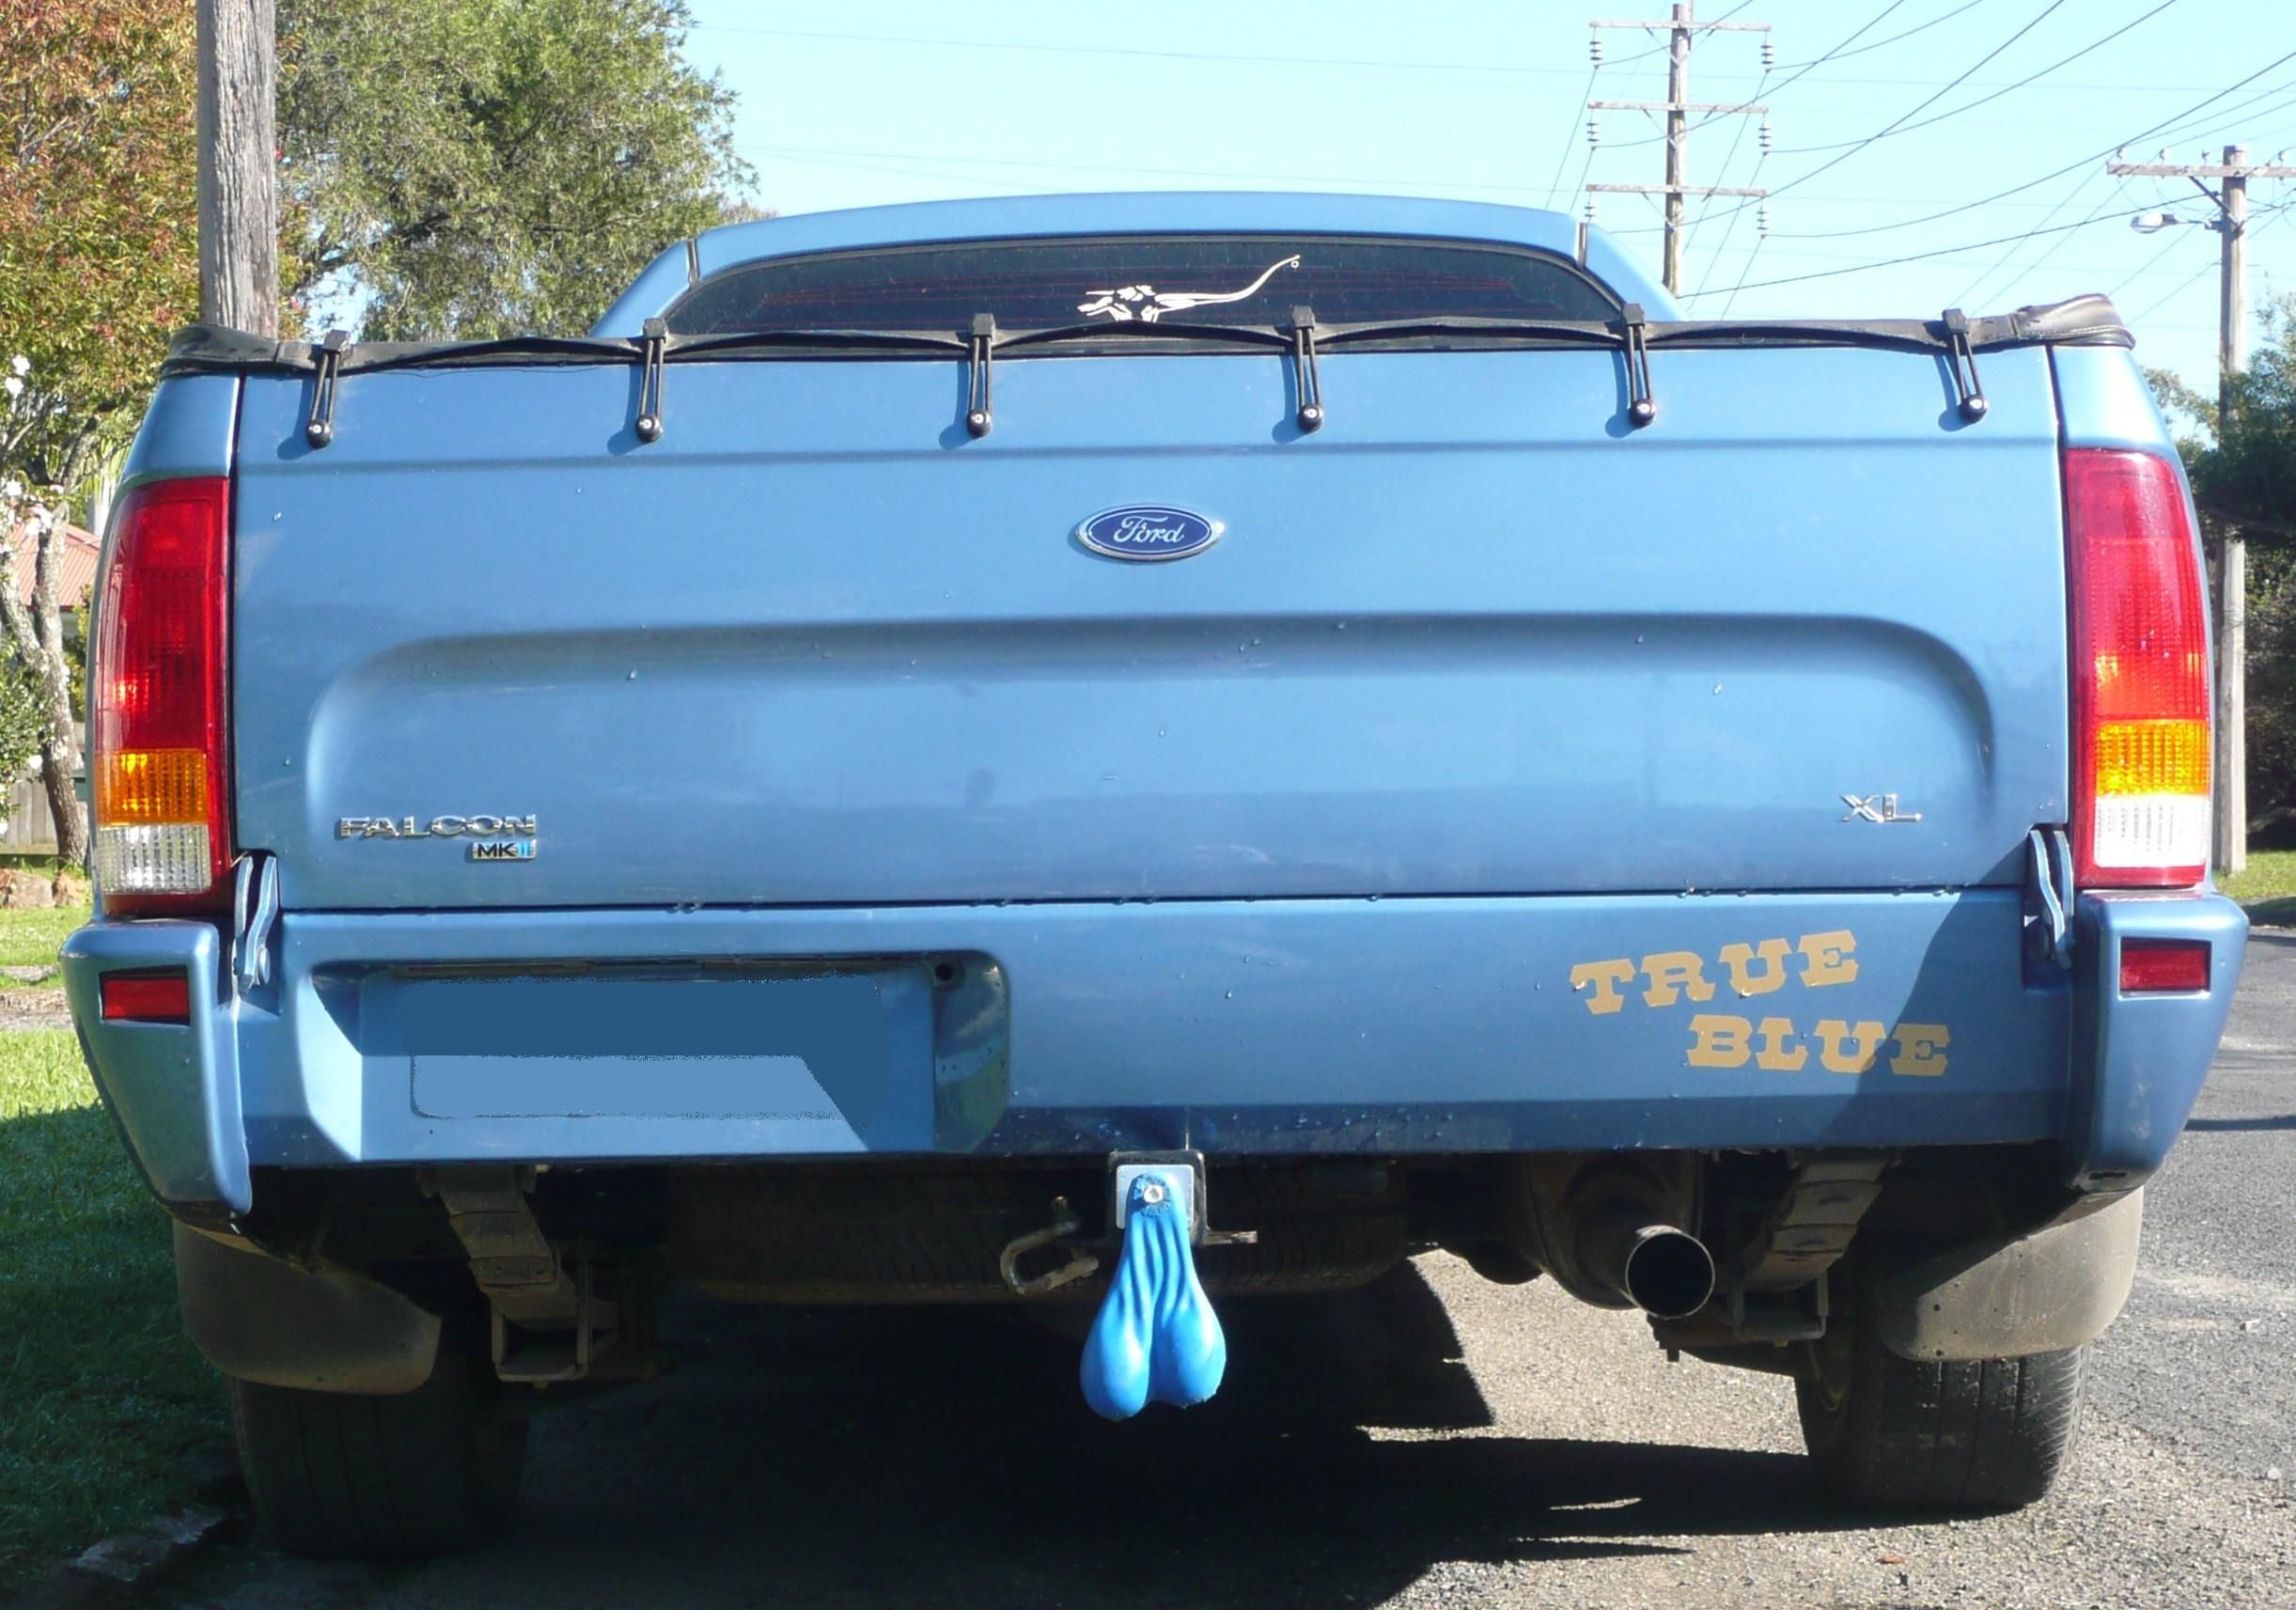 Via blue ford truck with nutz